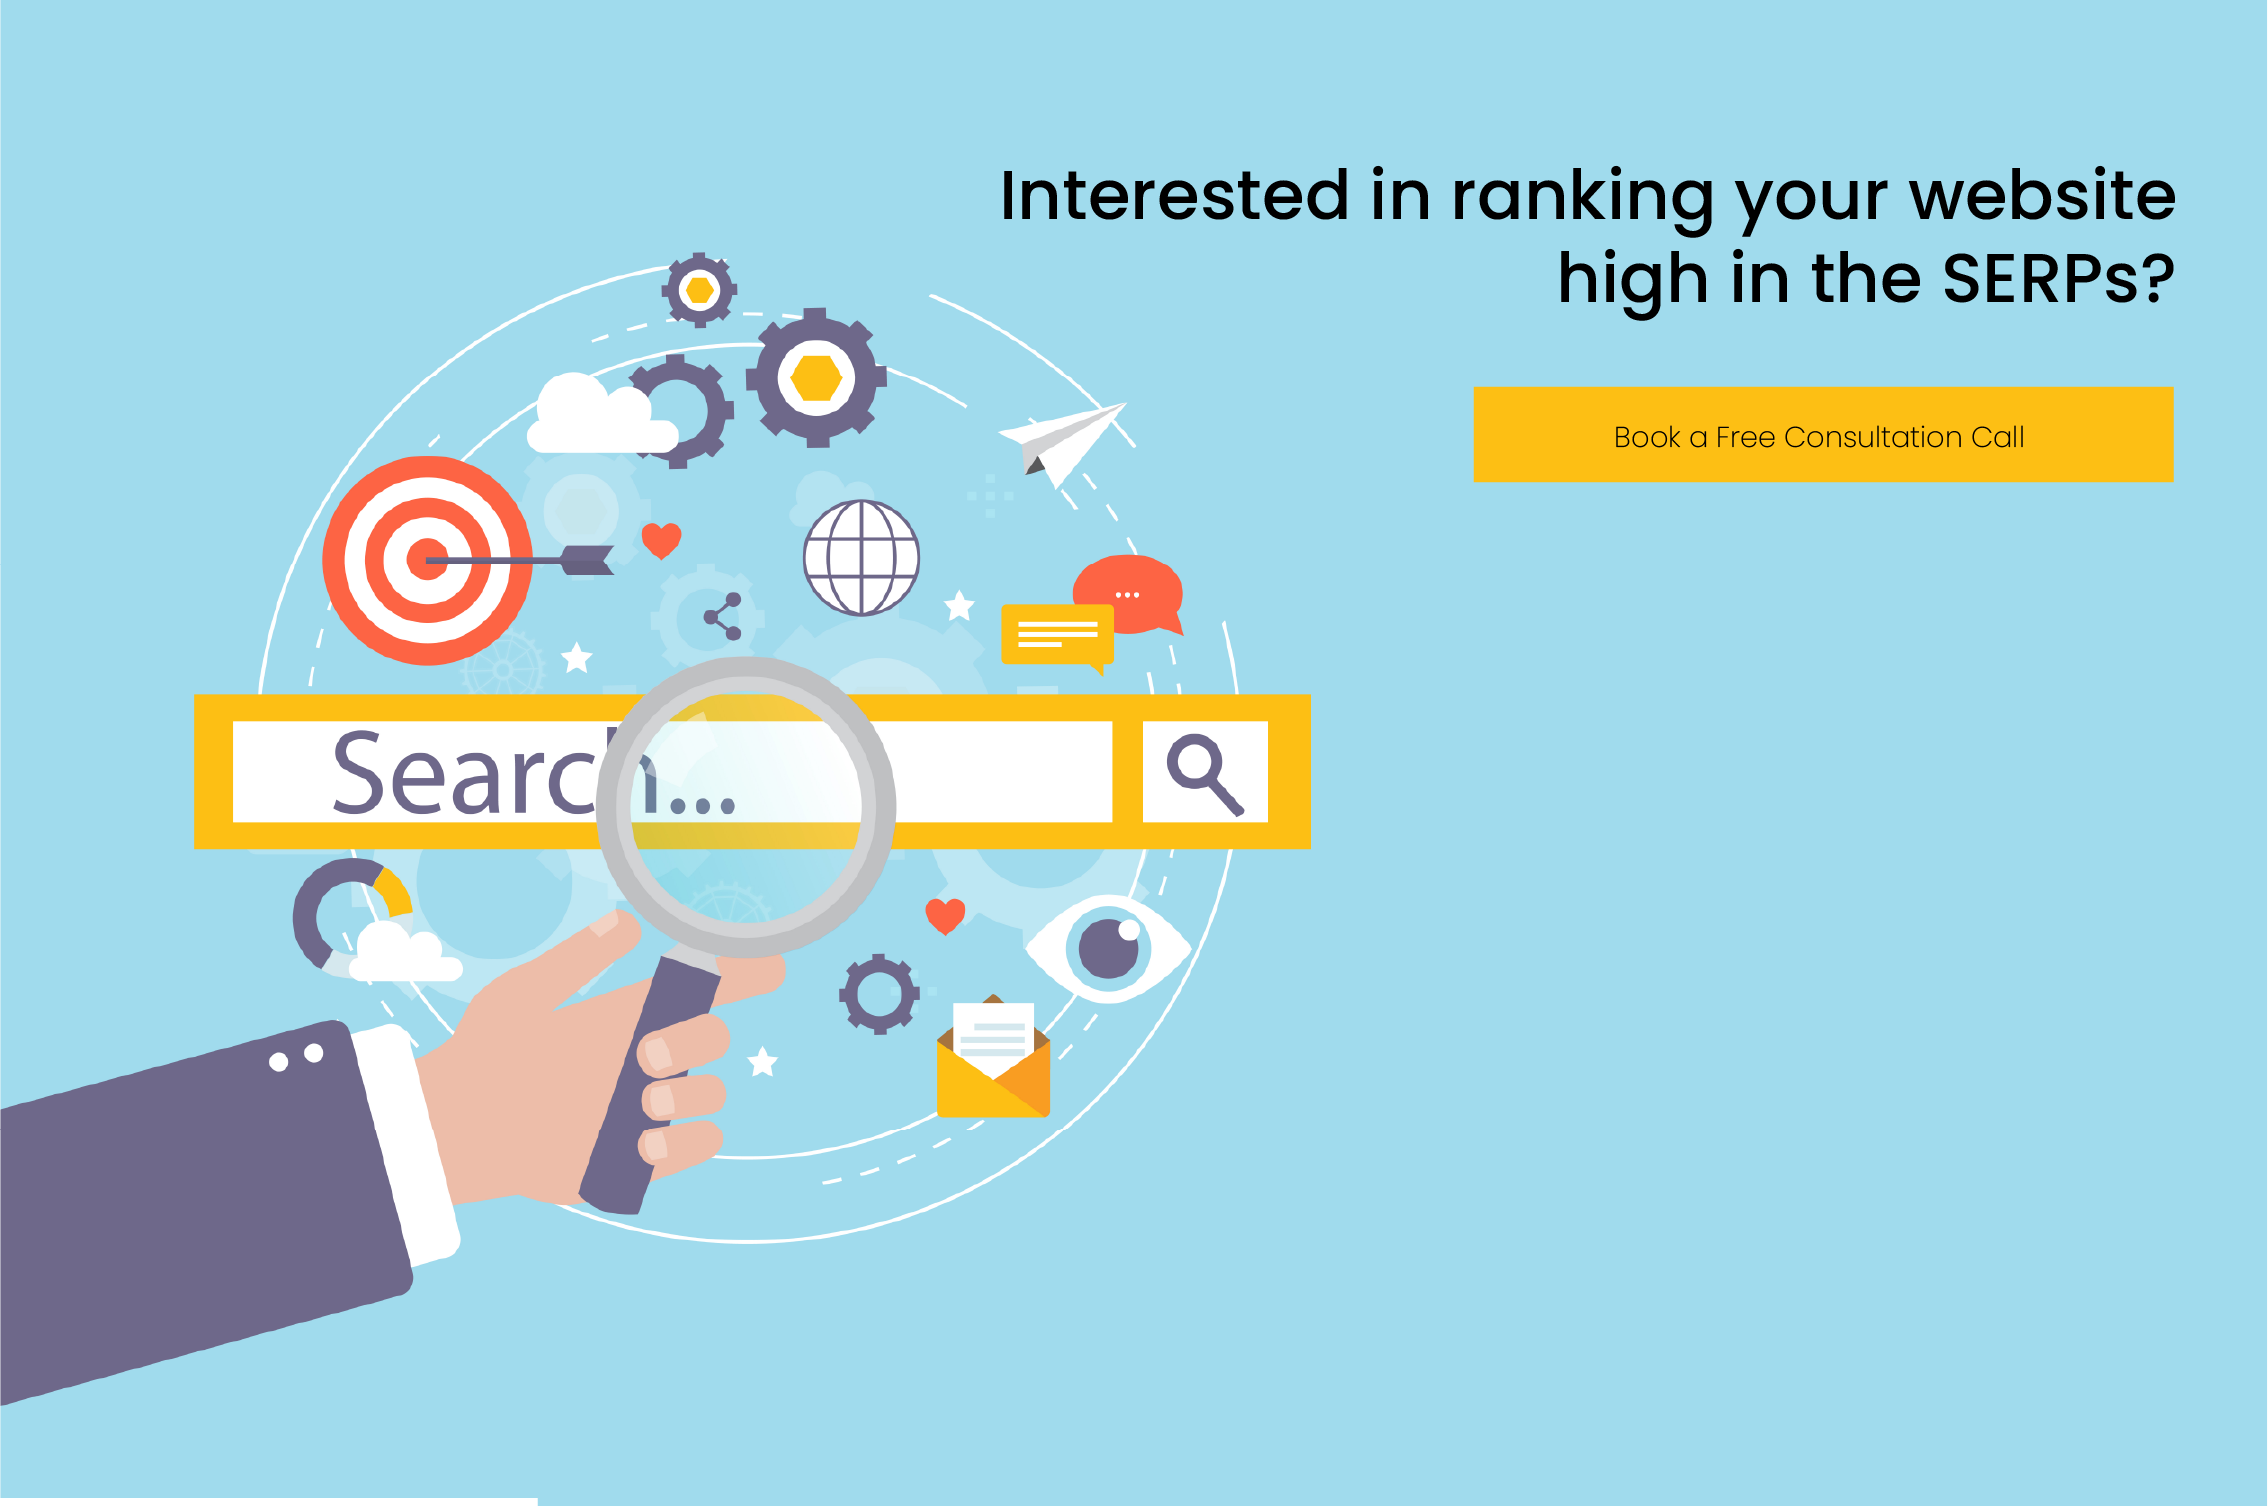 Ranking your website high in the SERPs